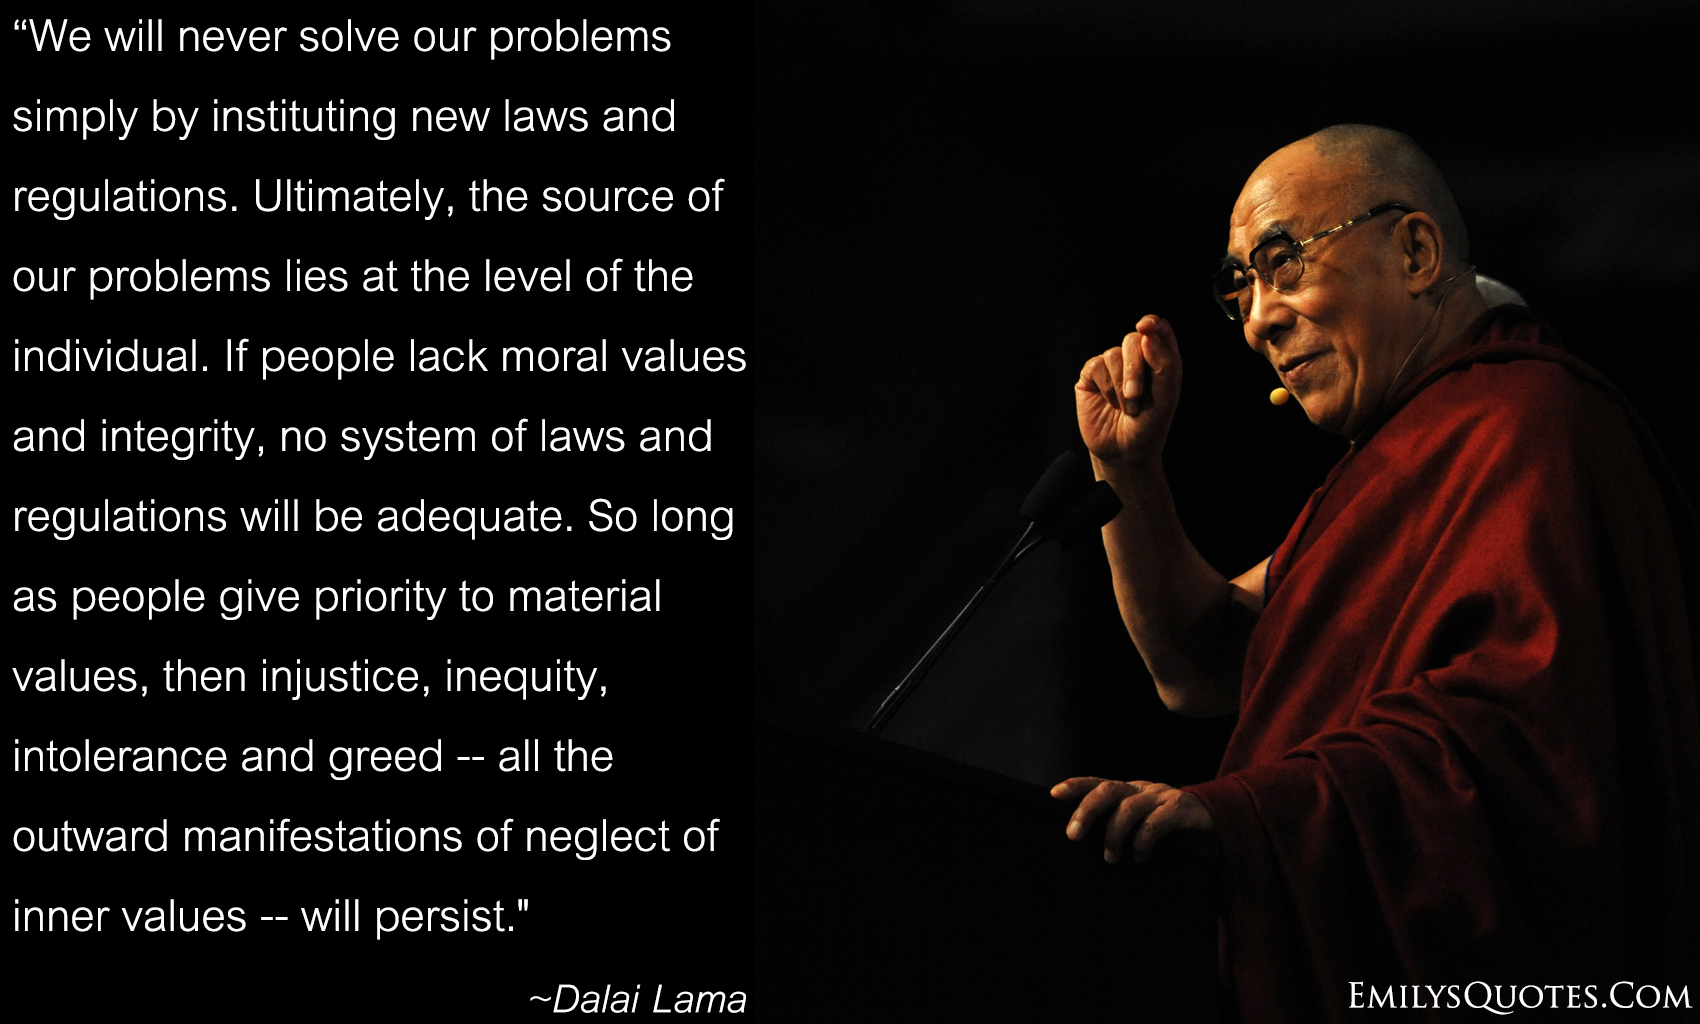 We will never solve our problems simply by instituting new laws and regulations. Ultimately, the source of our problems lies at the level of the individual. If people lack moral values and integrity, no system of laws and regulations will be adequate. So long as people give priority to material values, then injustice, inequity, intolerance and greed — all the outward manifestations of neglect of inner values — will persist